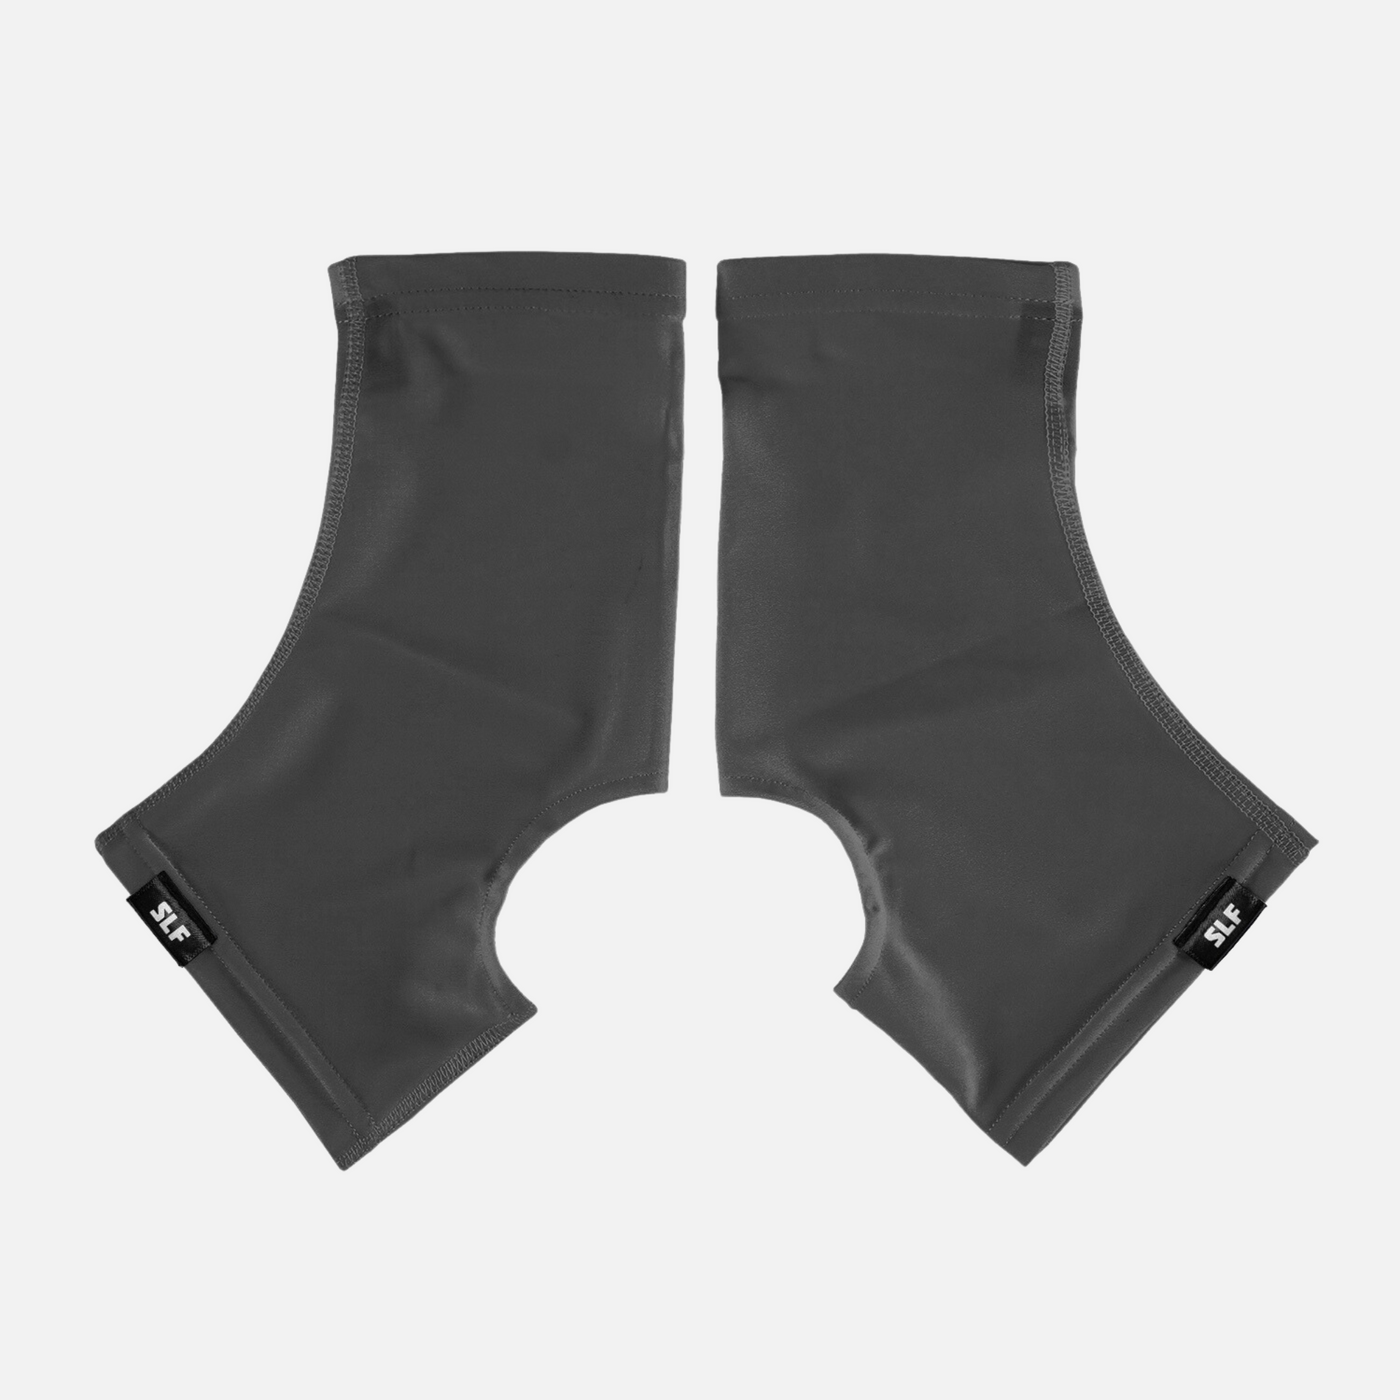 Hue Dark Gray Kids Spats / Cleat Covers